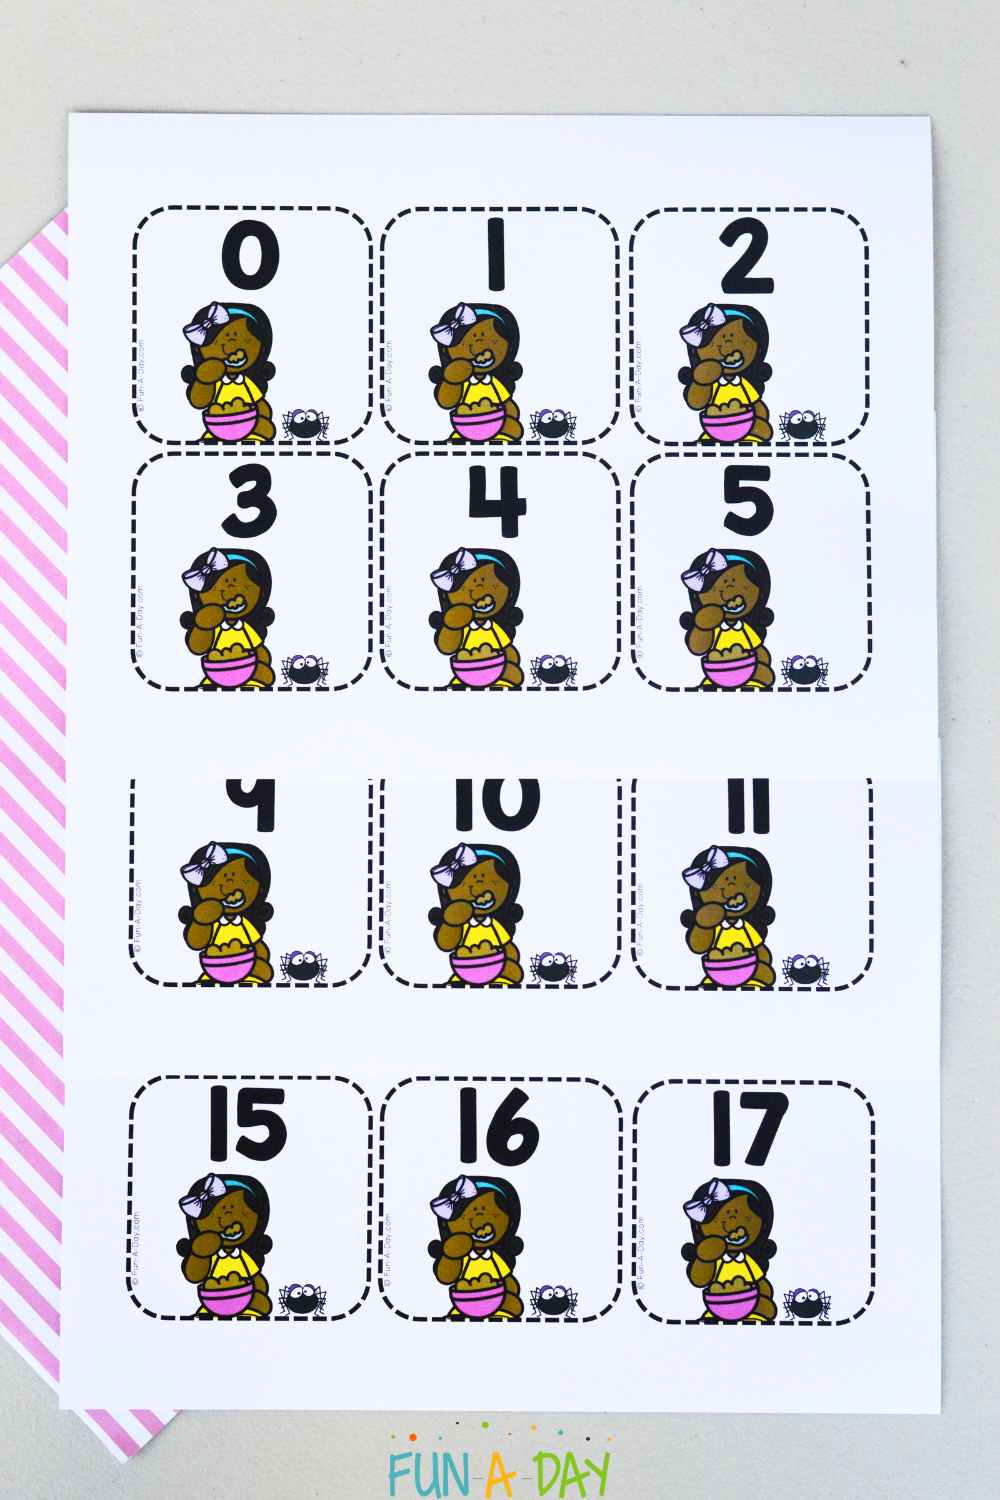 Printable Little Miss Muffet number card pages.